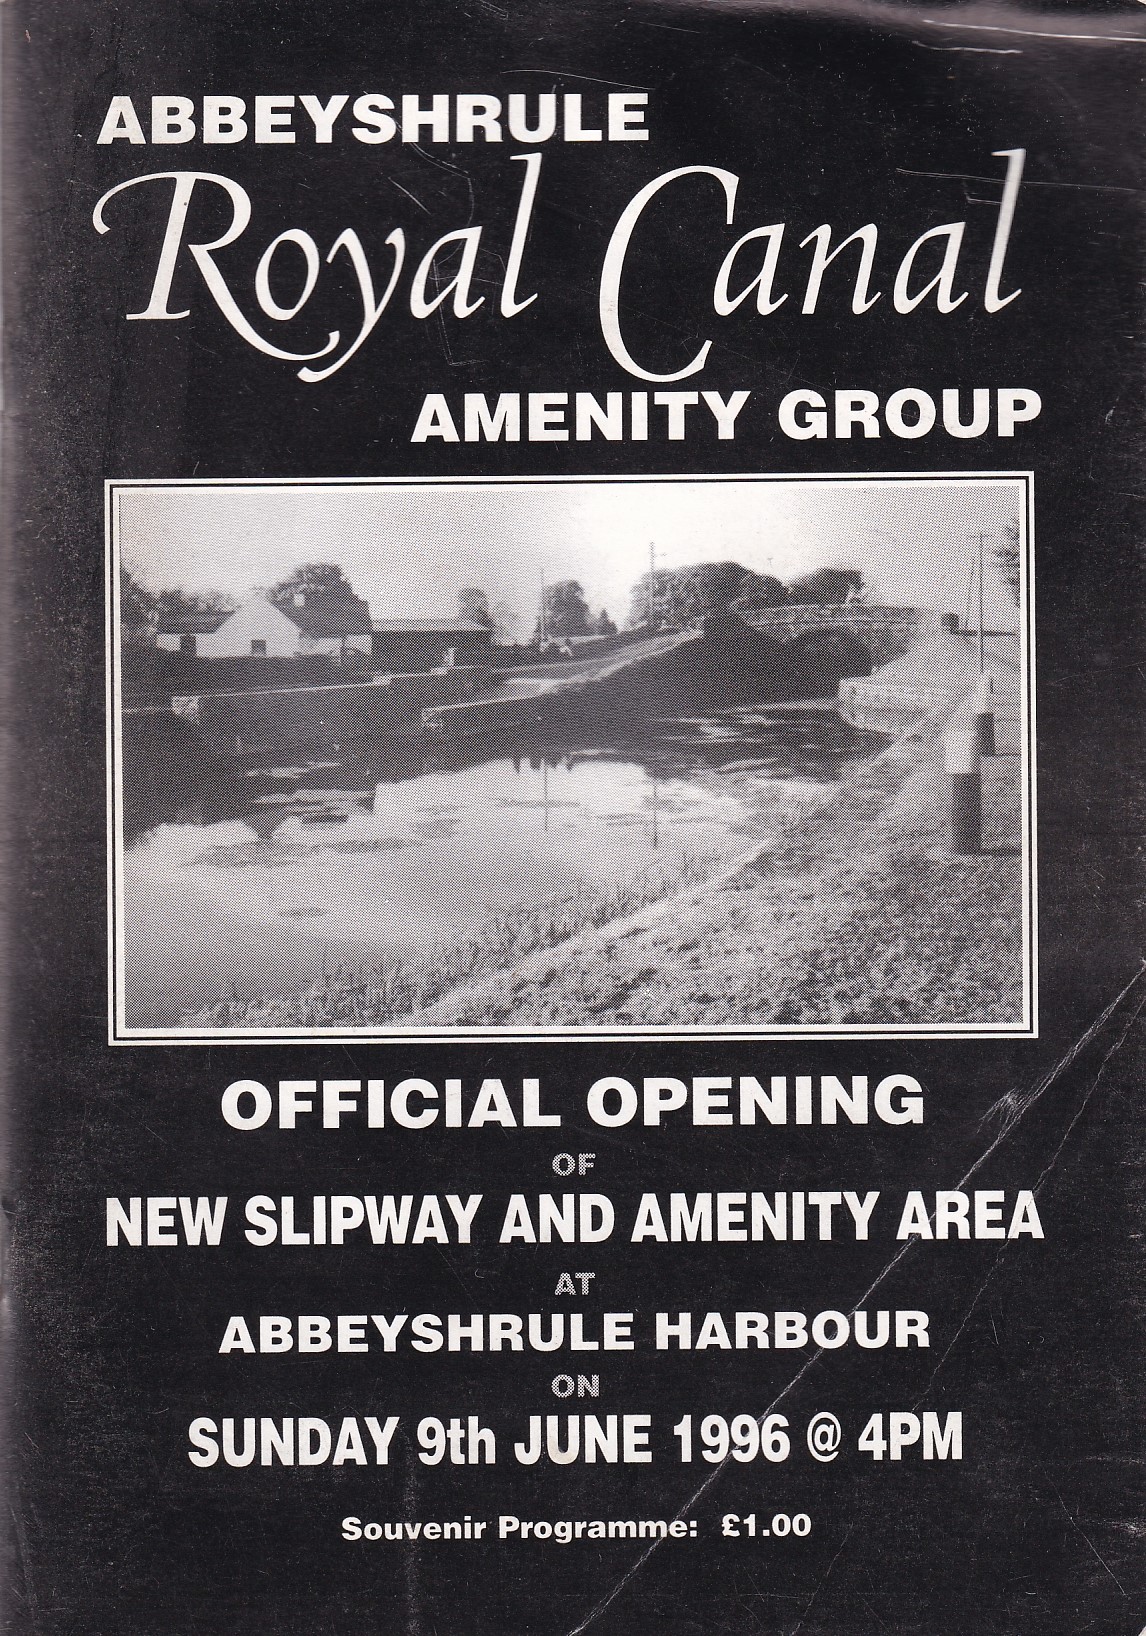 Abbeyshrule Royal Canal Amenity Group: Official Opening of New Slipway and Amenity Area at Abbeyshrule Harbour on Sunday 9th June 1996 @ 4pm, Souvenir Programme | Various | Charlie Byrne's